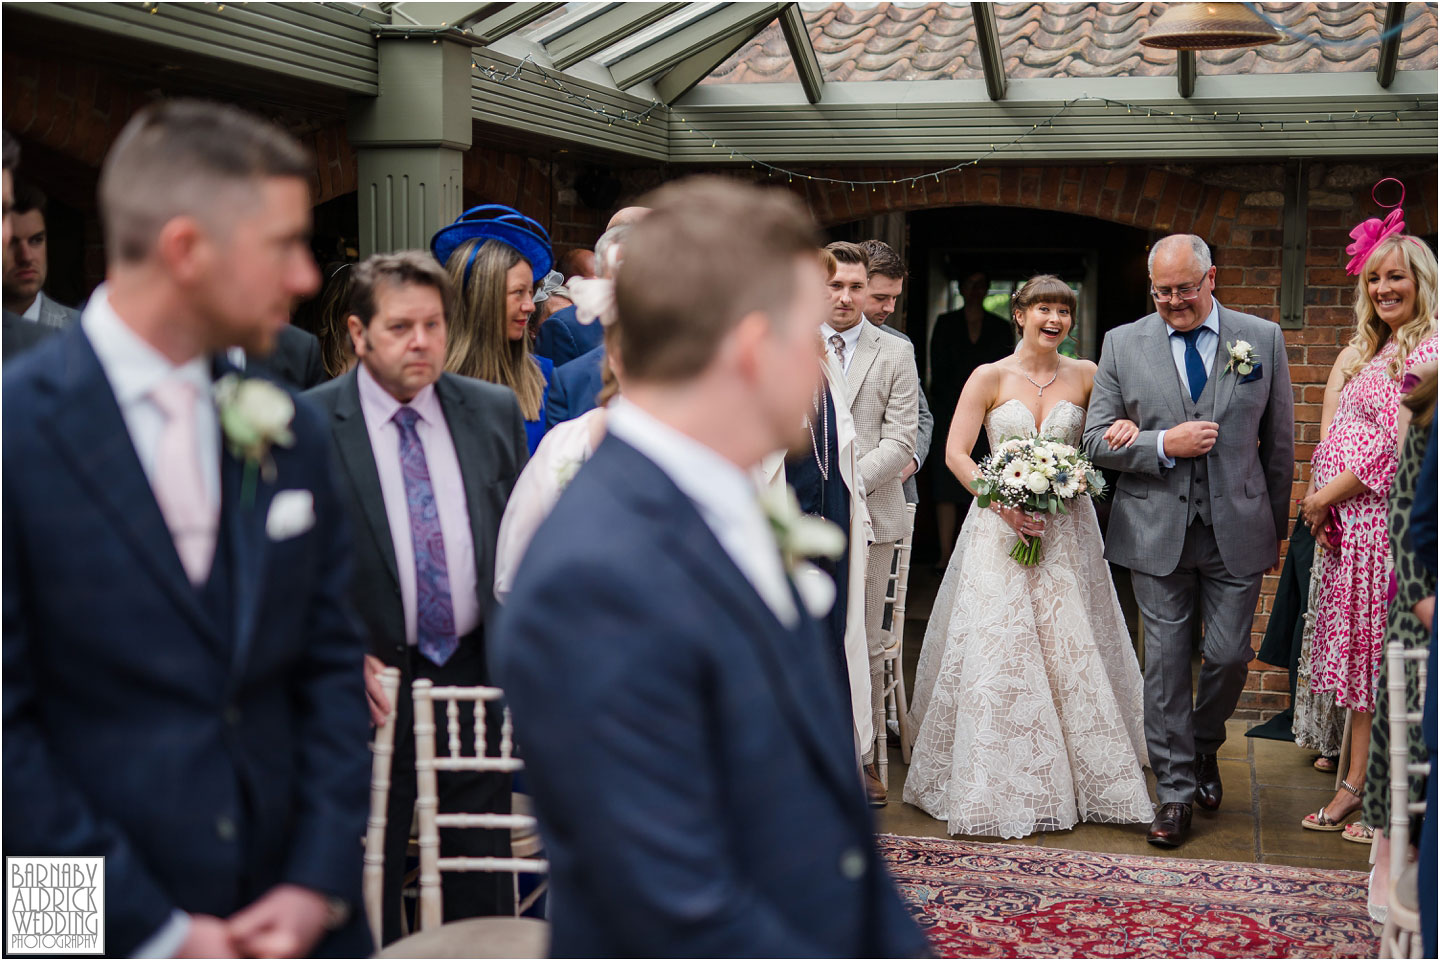 Civil Wedding ceremony Photography at The Pheasant Hotel Harome, The Pheasant Hotel Wedding Helmsley, Wedding Photography at The Pheasant Hotel North Yorkshire, North Yorkshire Wedding Photographer